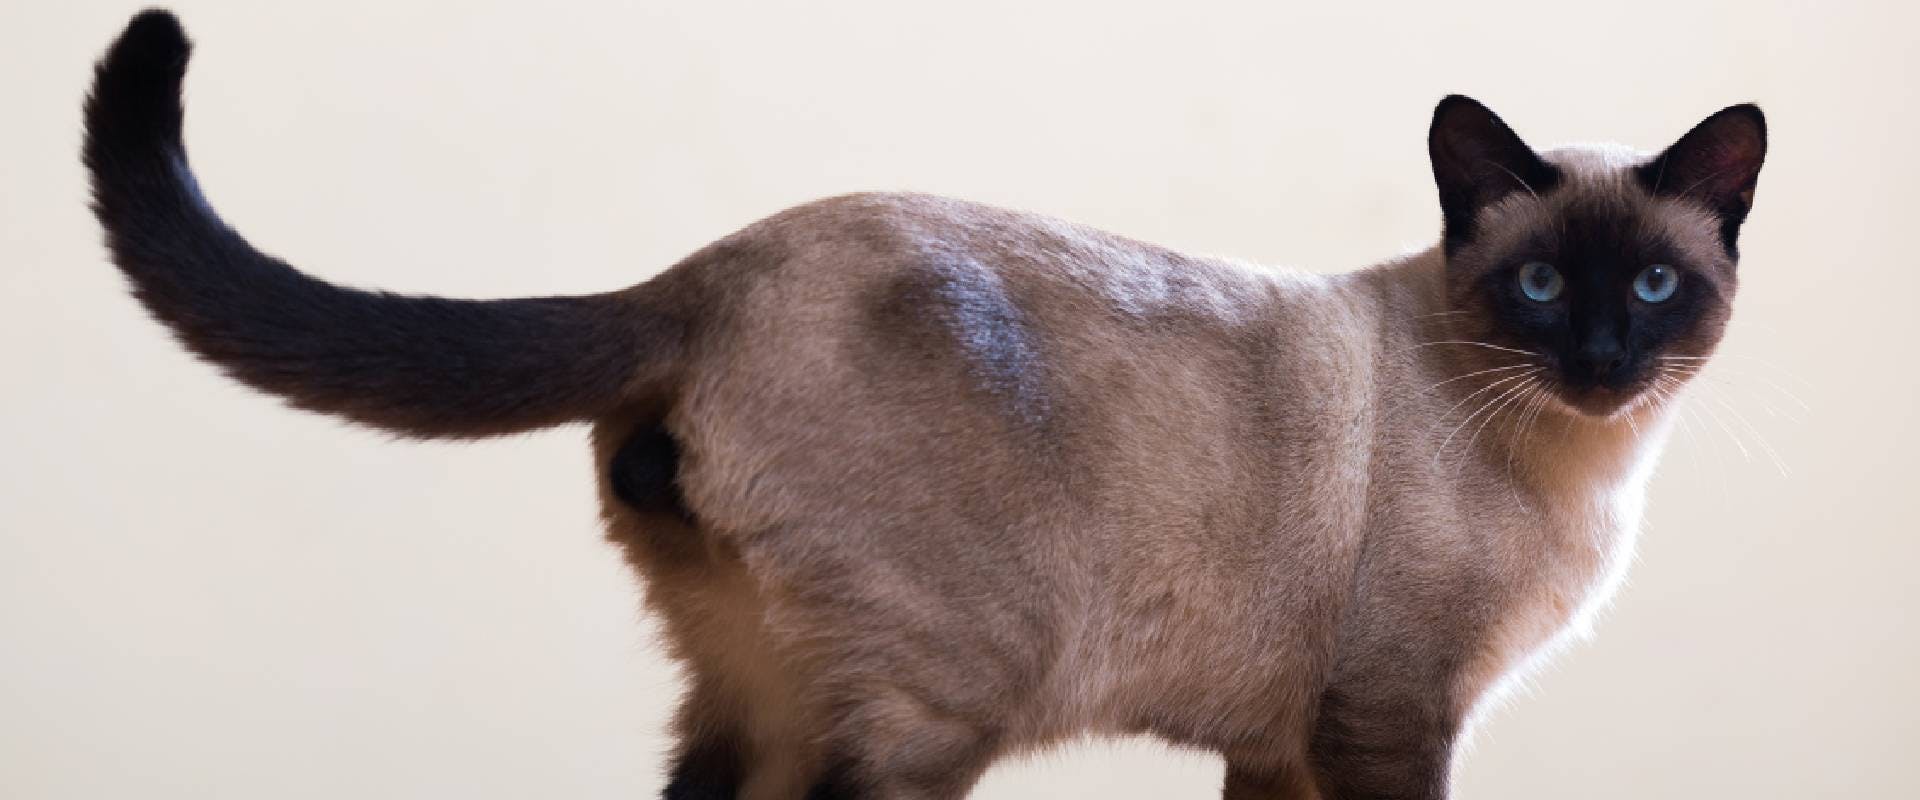 Siamese cat with an up-turned cat tail